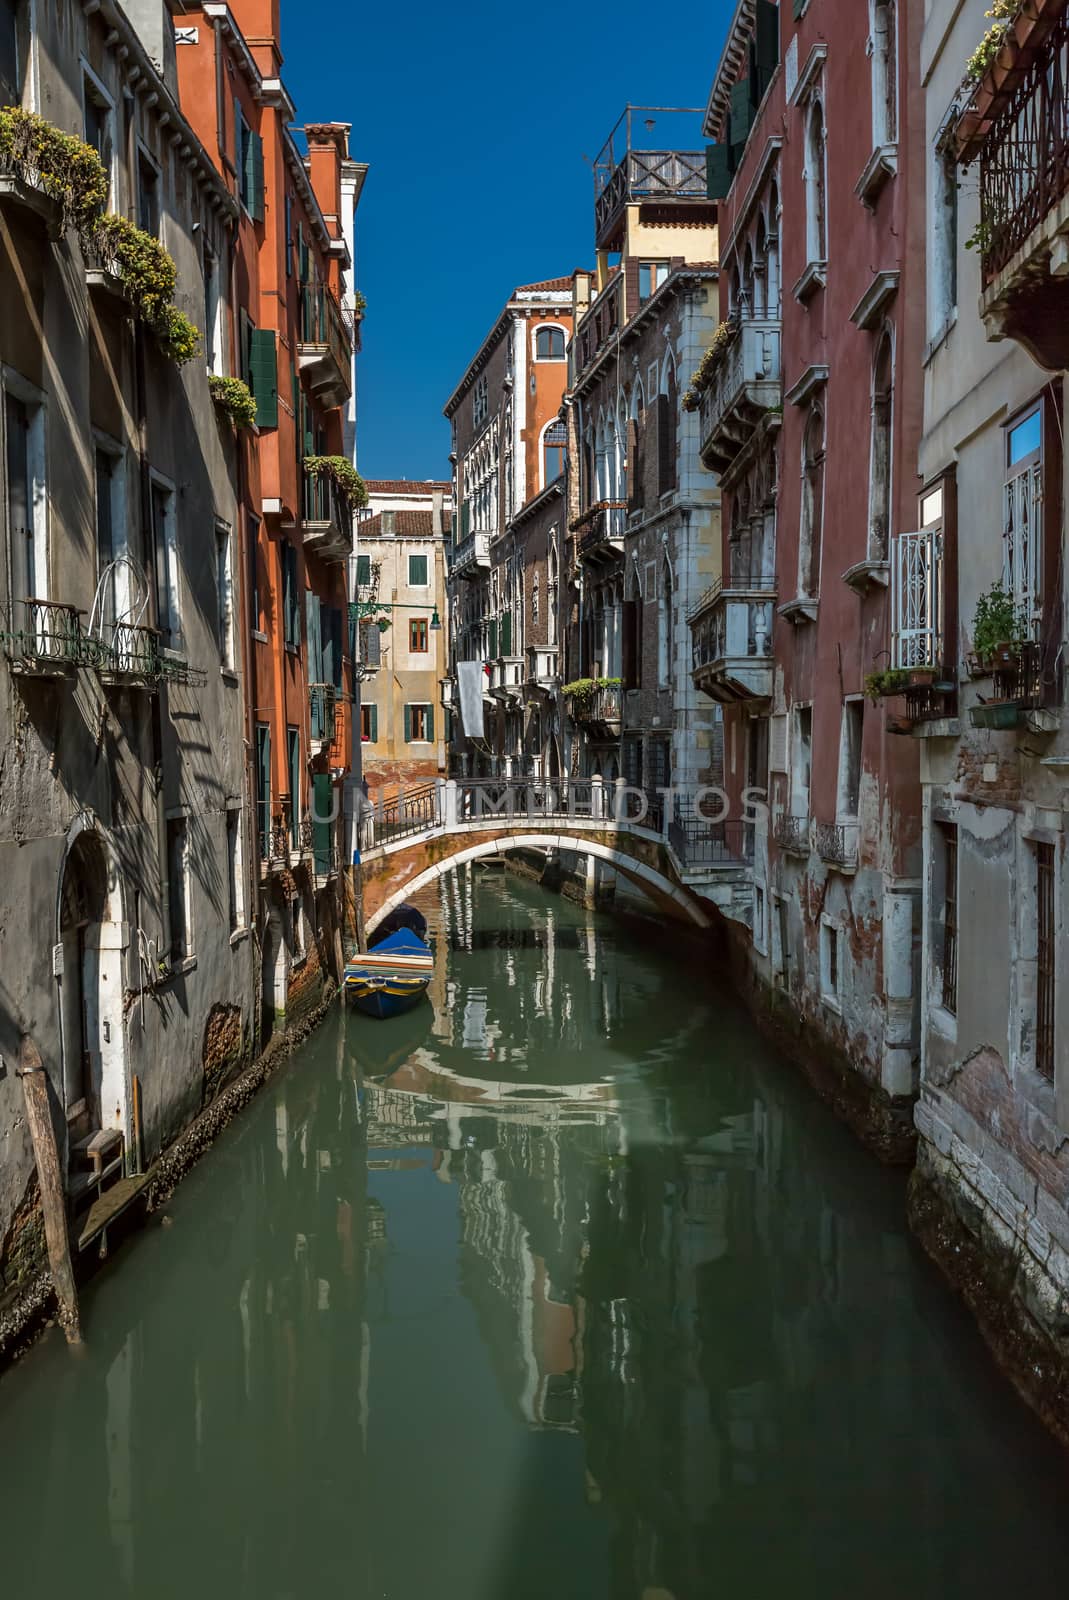 Typical Canal, Bridge and Historical Buildings in Venice, Italy by anshar